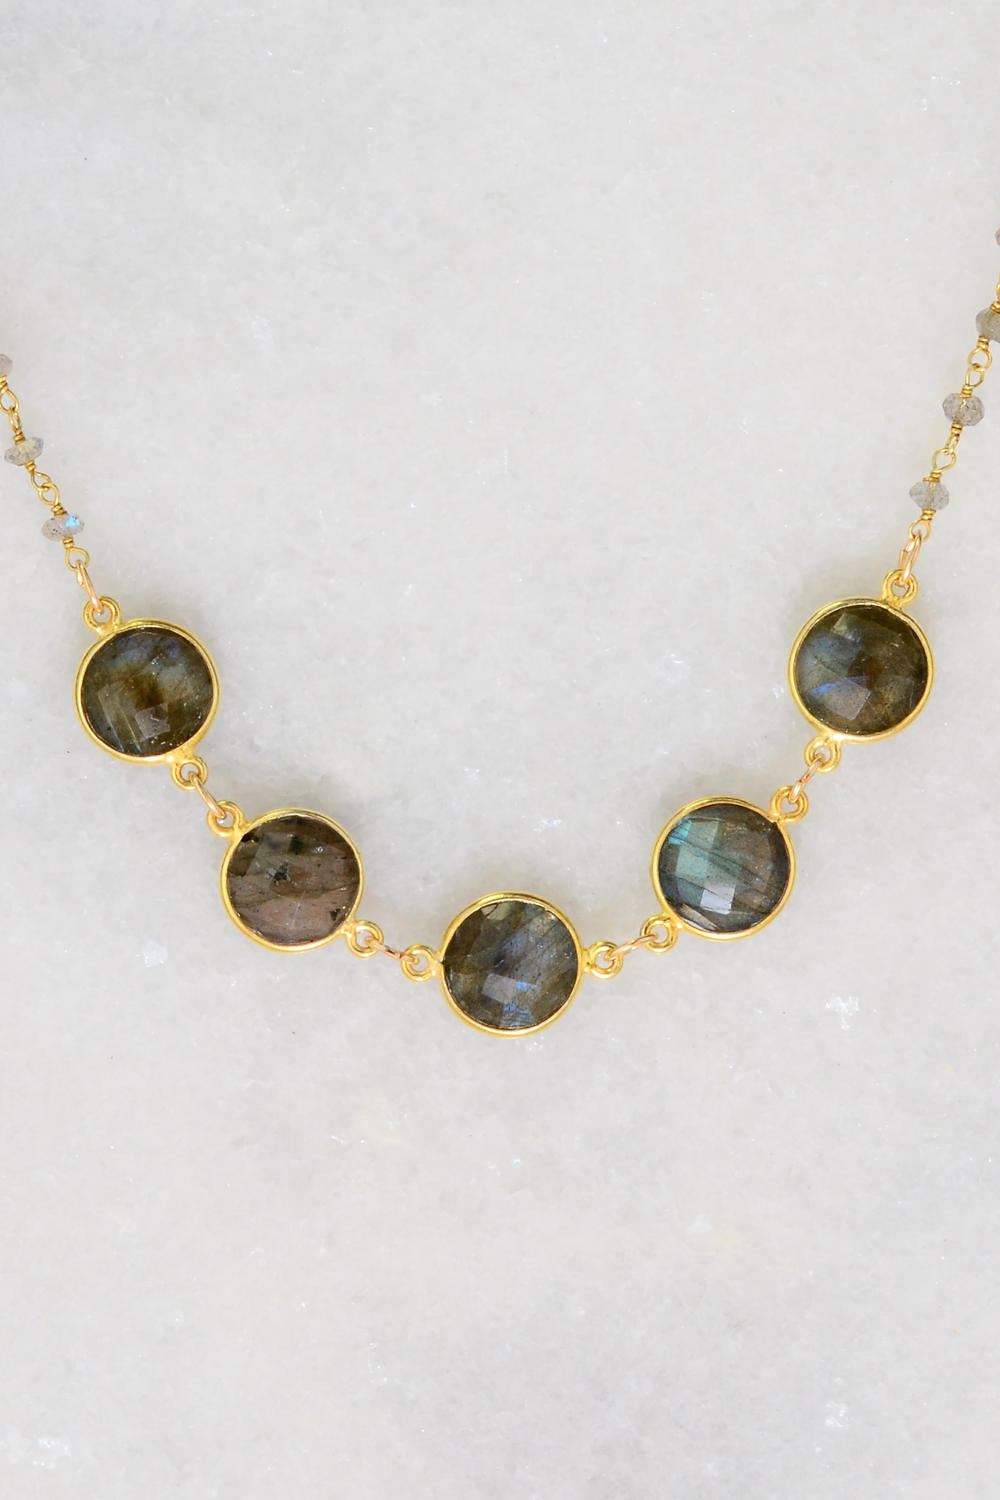 Labradorite Necklace - Mothers Day Gift - Momma Necklace - February Birthstone - Mom Necklace - Statement Necklace - Handmade Necklace